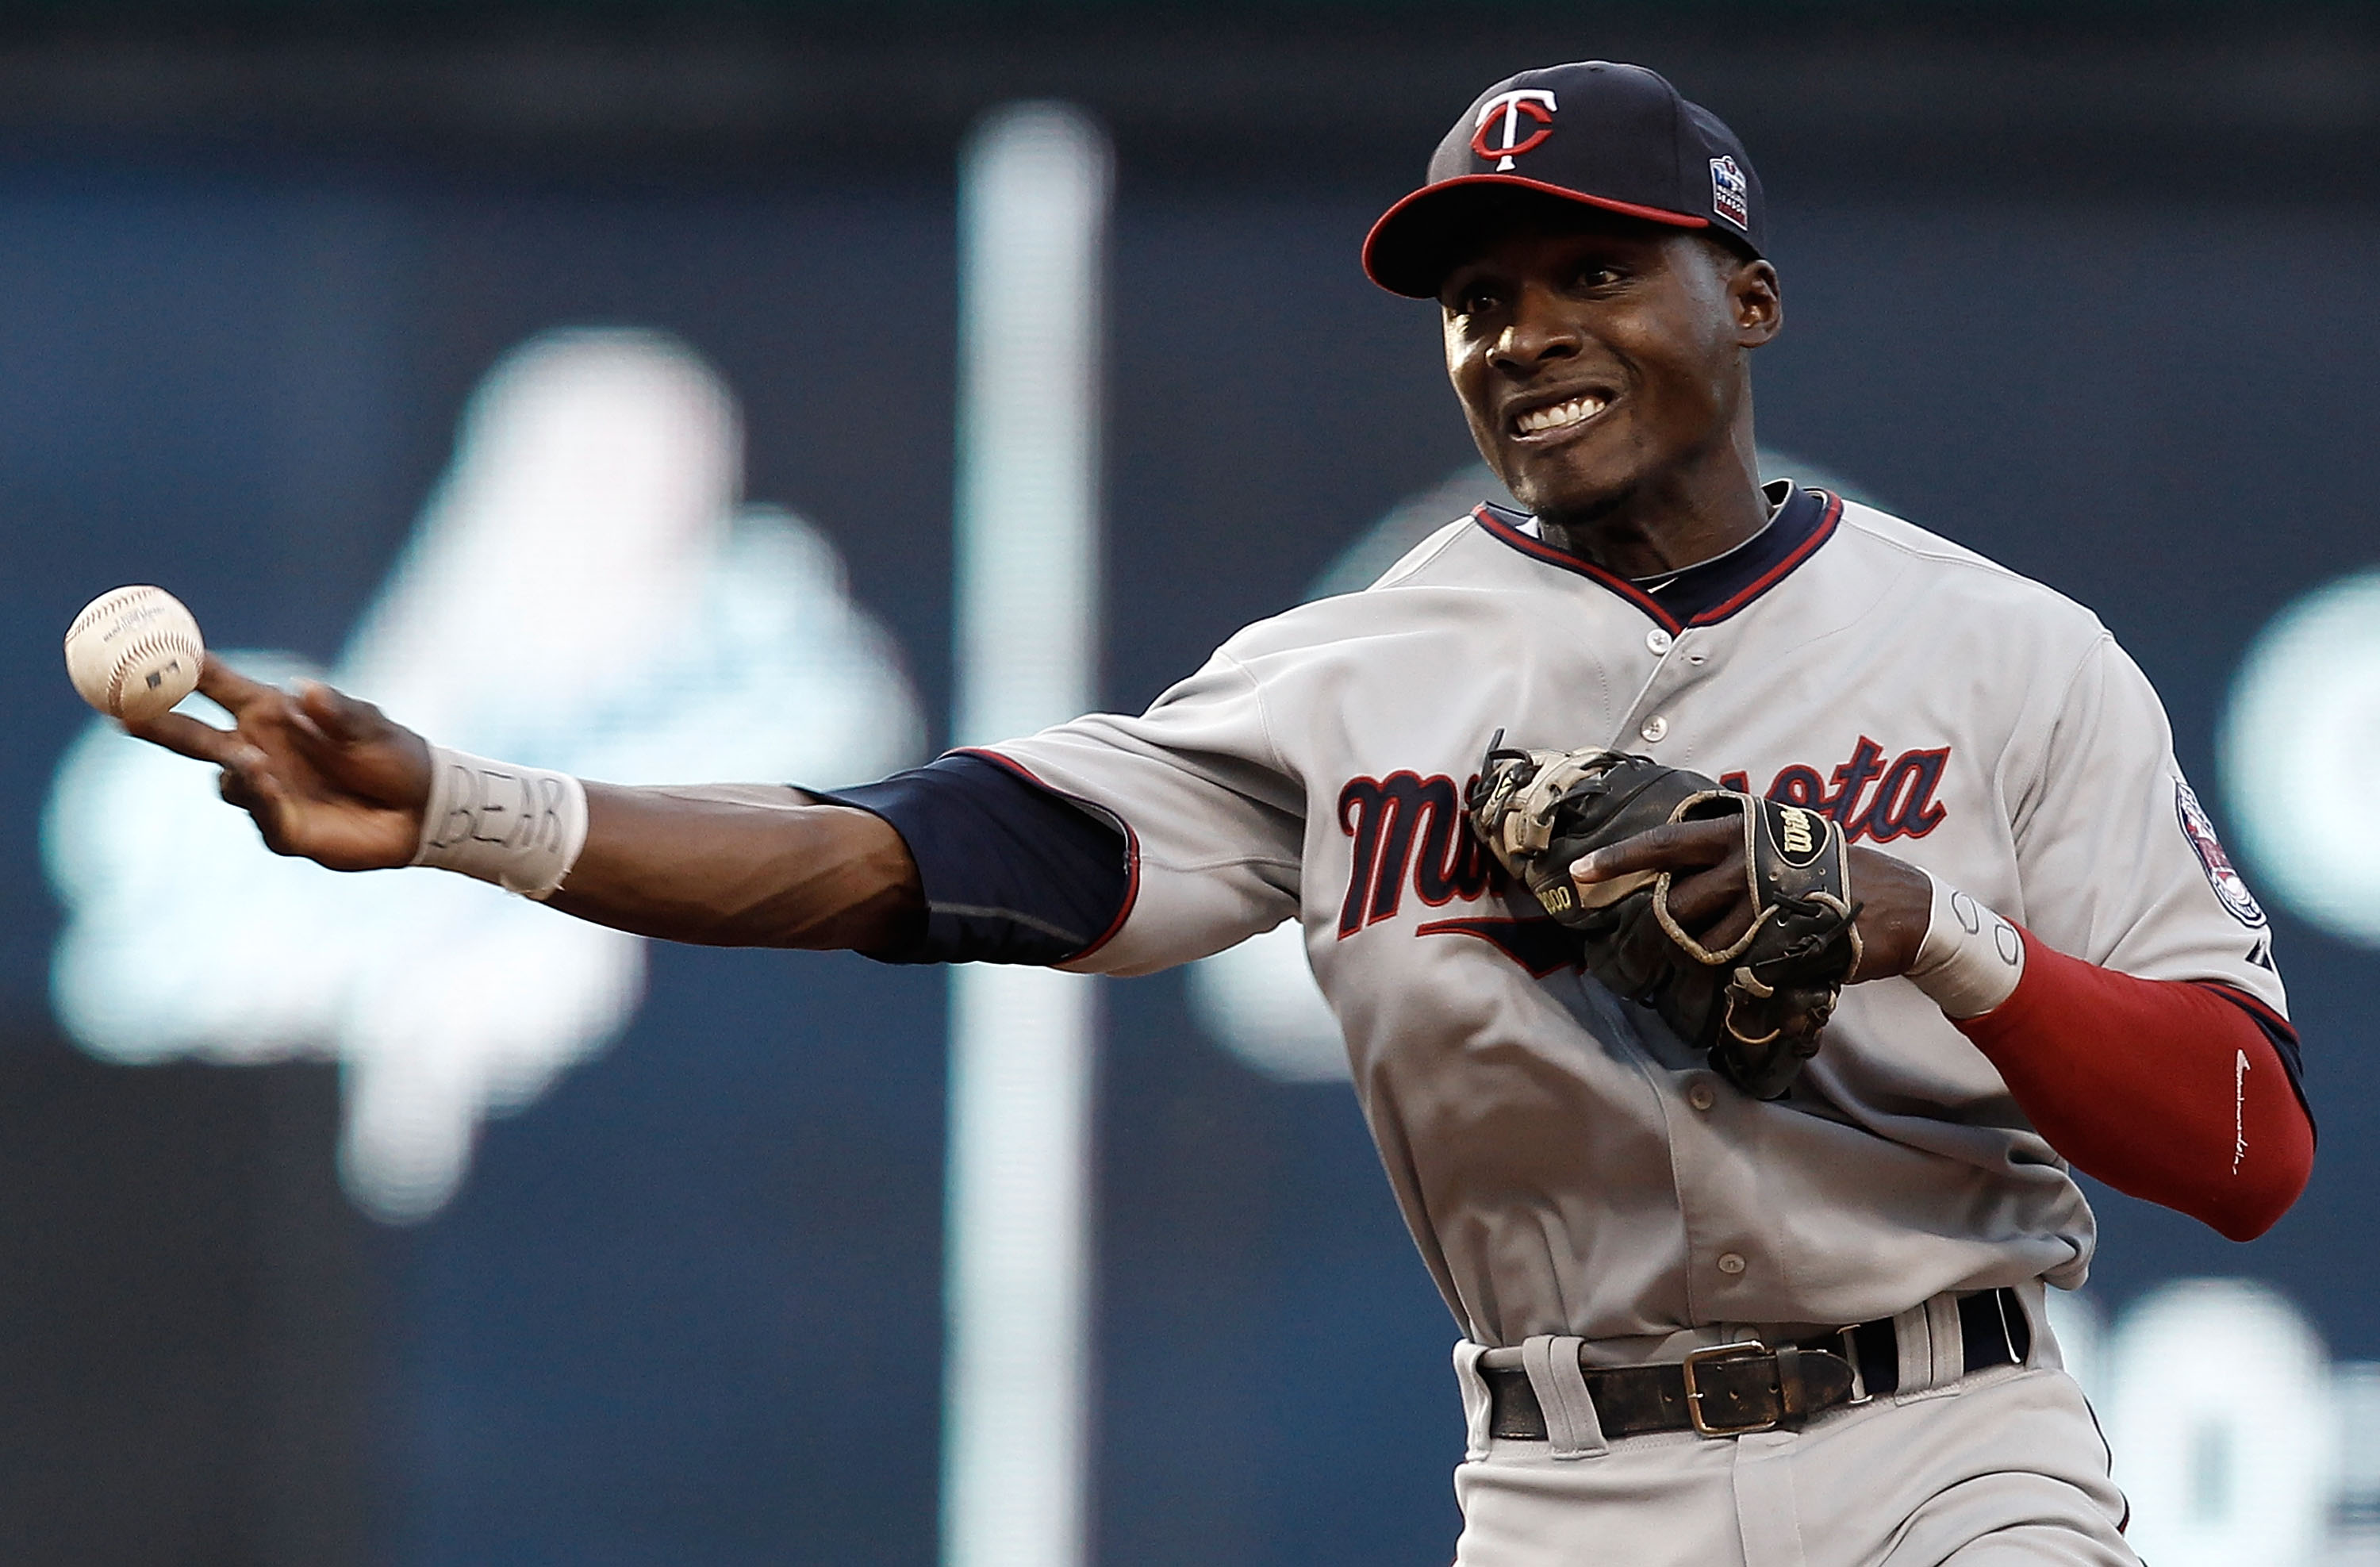 CLEVELAND, OH- APRIL 30: Orlando Hudson #1 of the Minnesota Twins throws to first base during the game against the Cleveland Indians on April 30, 2010 at Progressive Field in Cleveland, Ohio.  (Photo by Jared Wickerham/Getty Images)